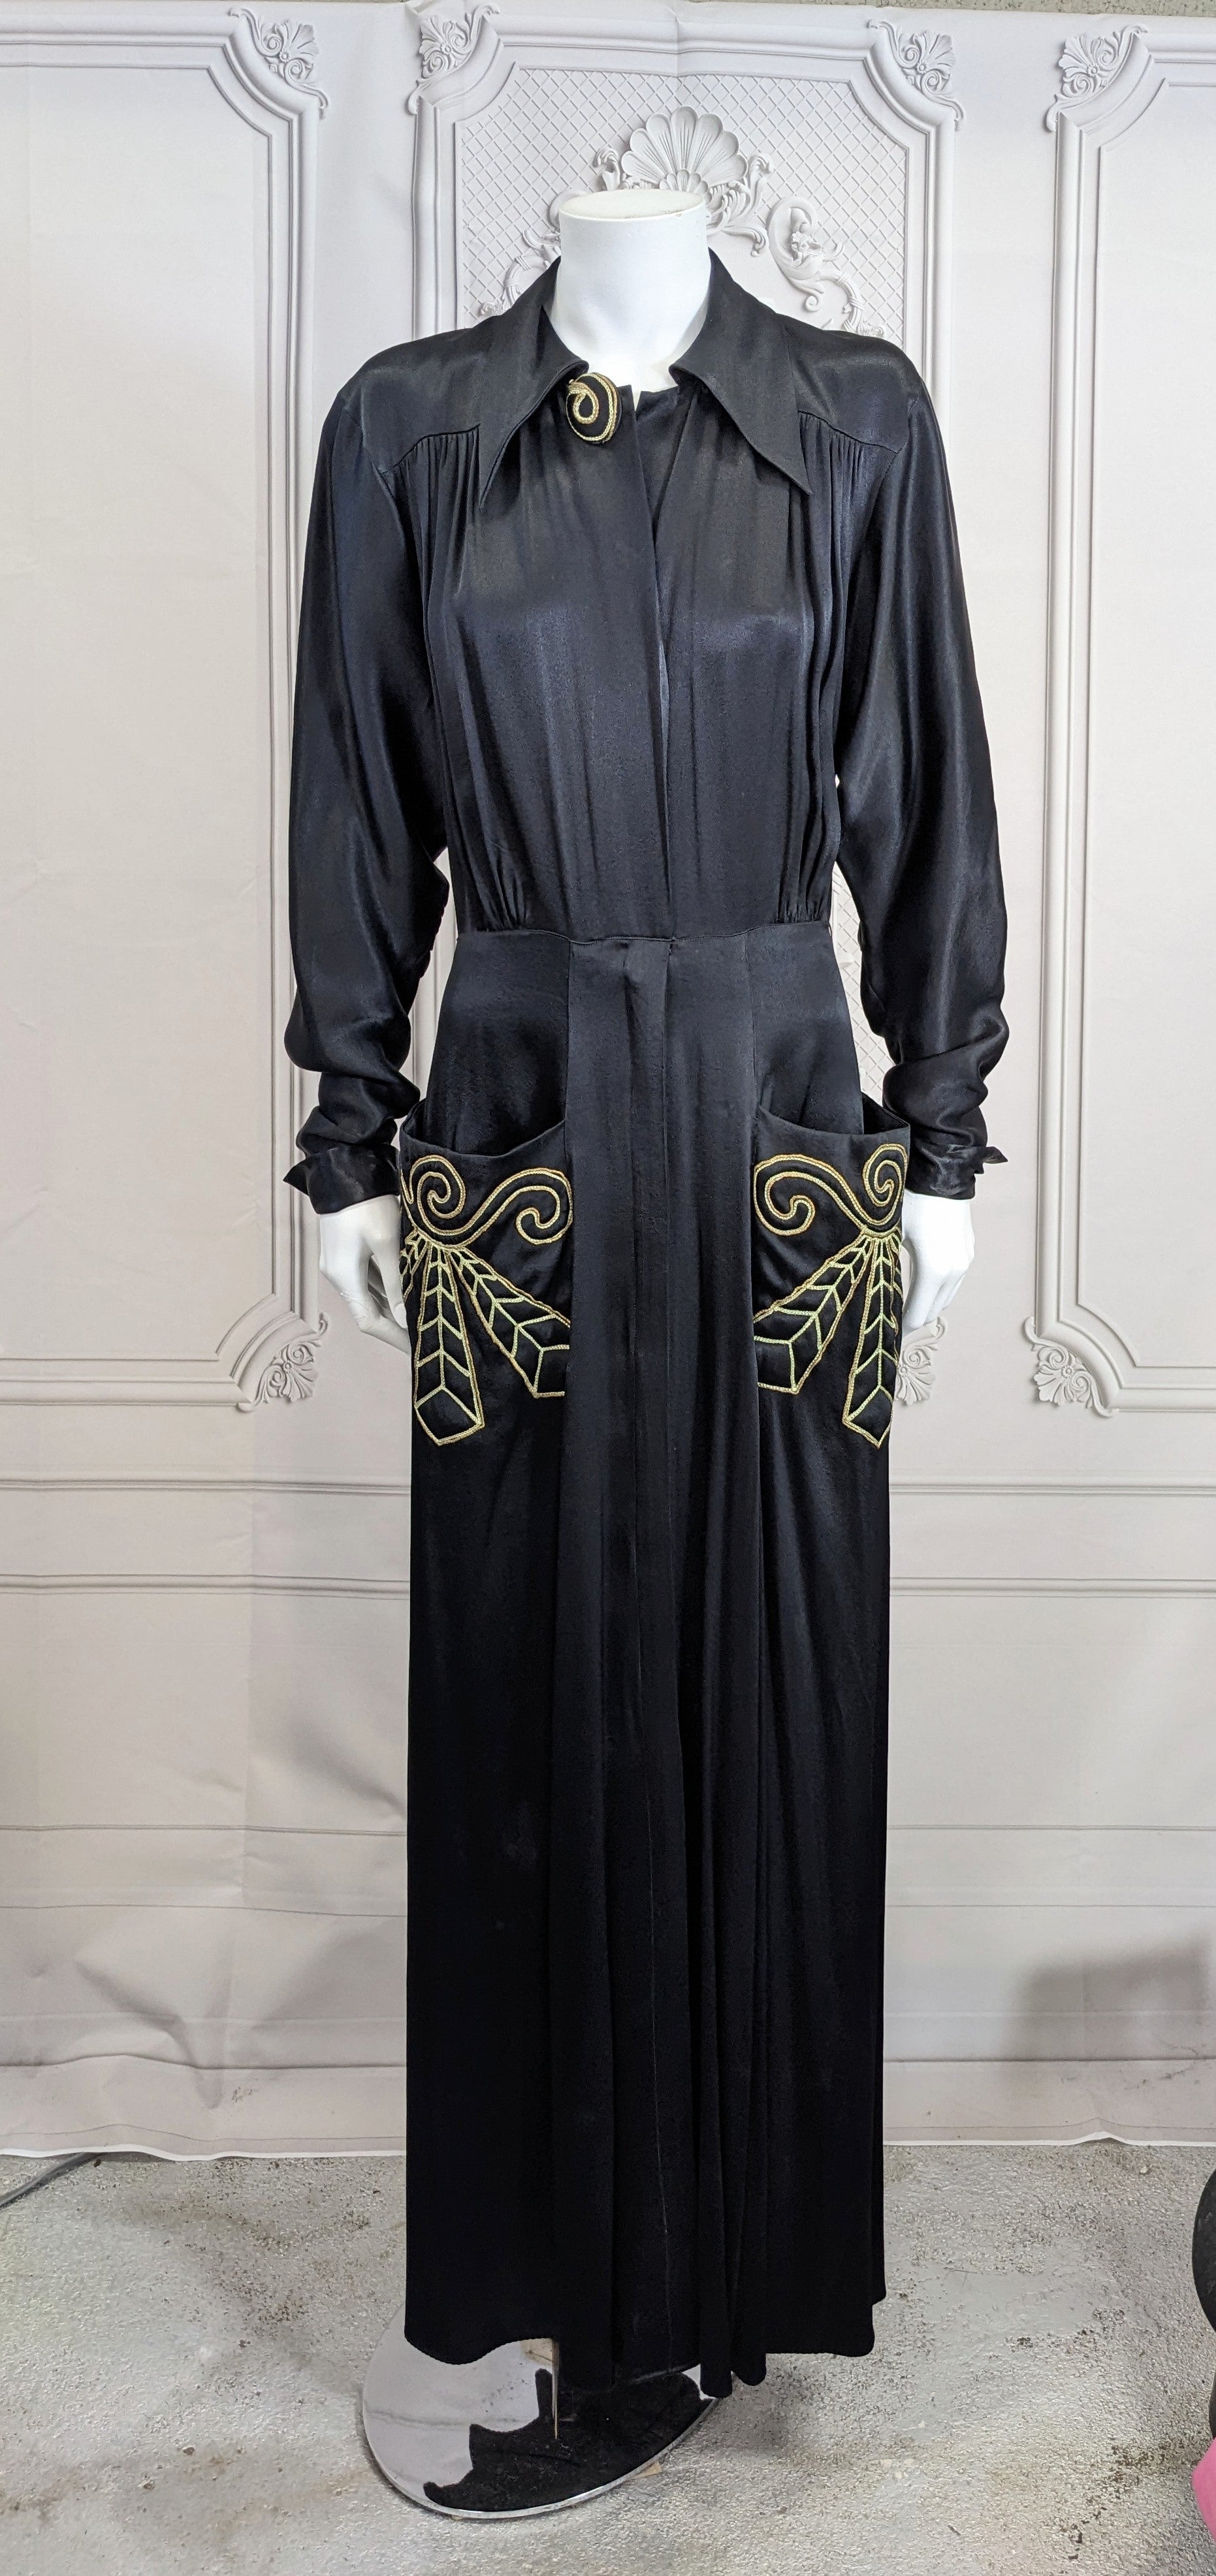 Dramatic Retro Silk Satin Embroidered Dressing Gown from the 1940's. Shirtwaist style in slinky black silk satin with Art Deco style soutache embroidery in yellow and gold tinsel on the stand away pockets and top button.
Designed as a home dressing